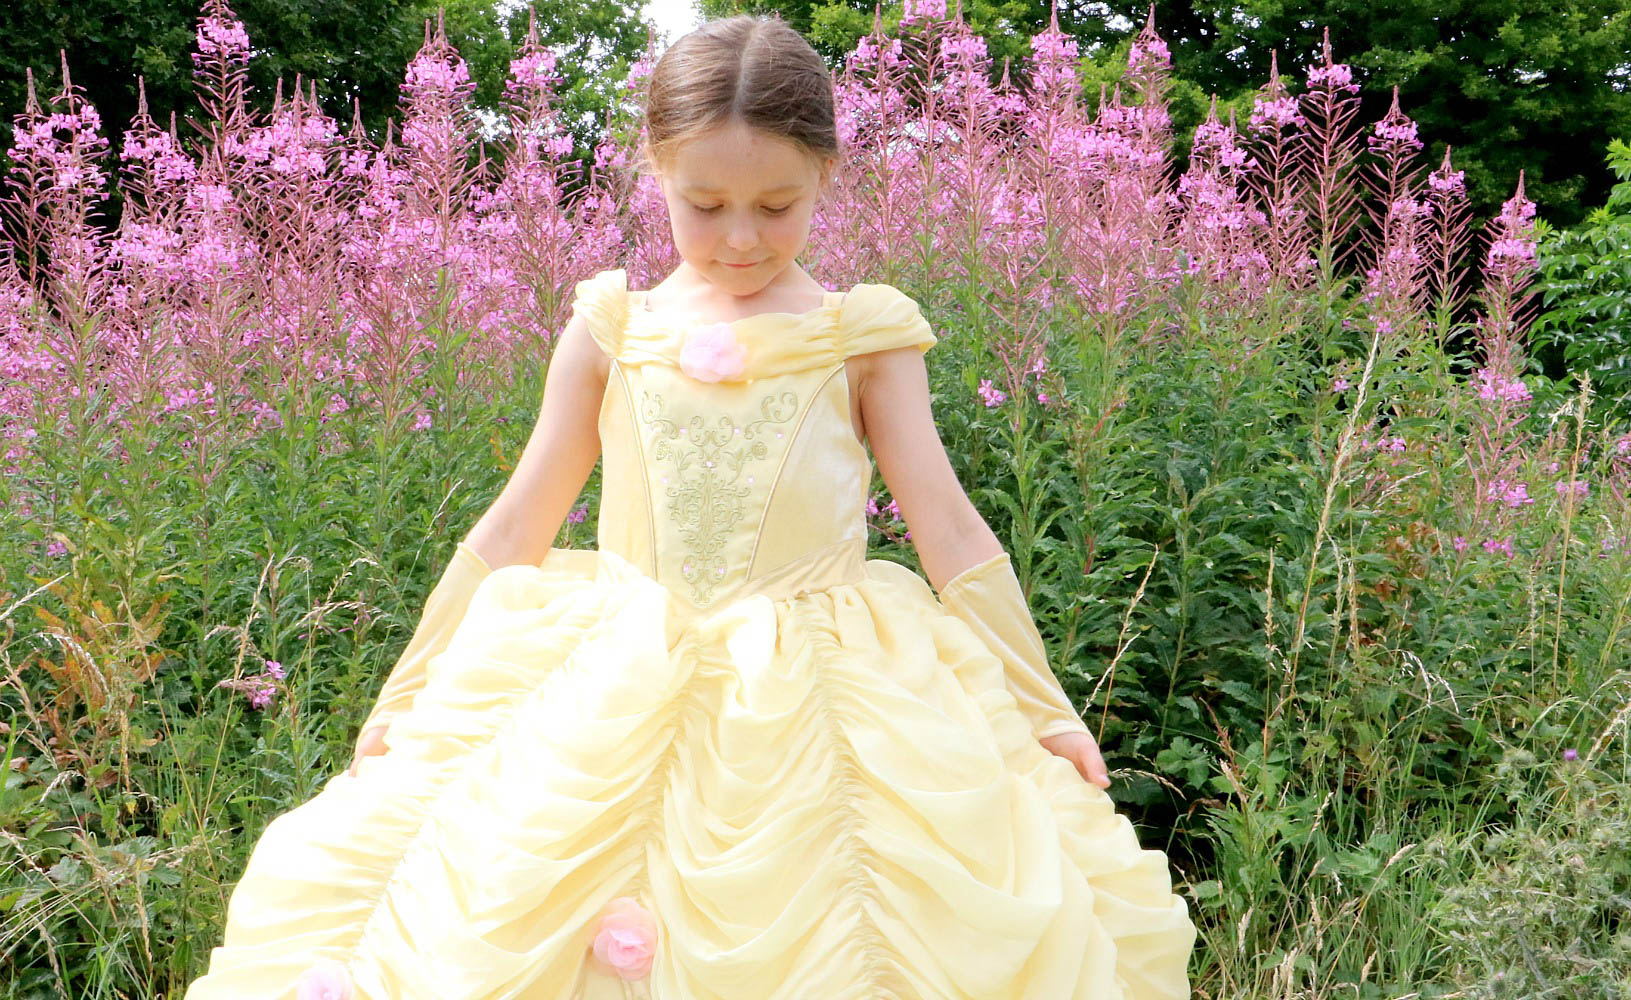 The Limited Edition Disney Belle Dress - PODcast